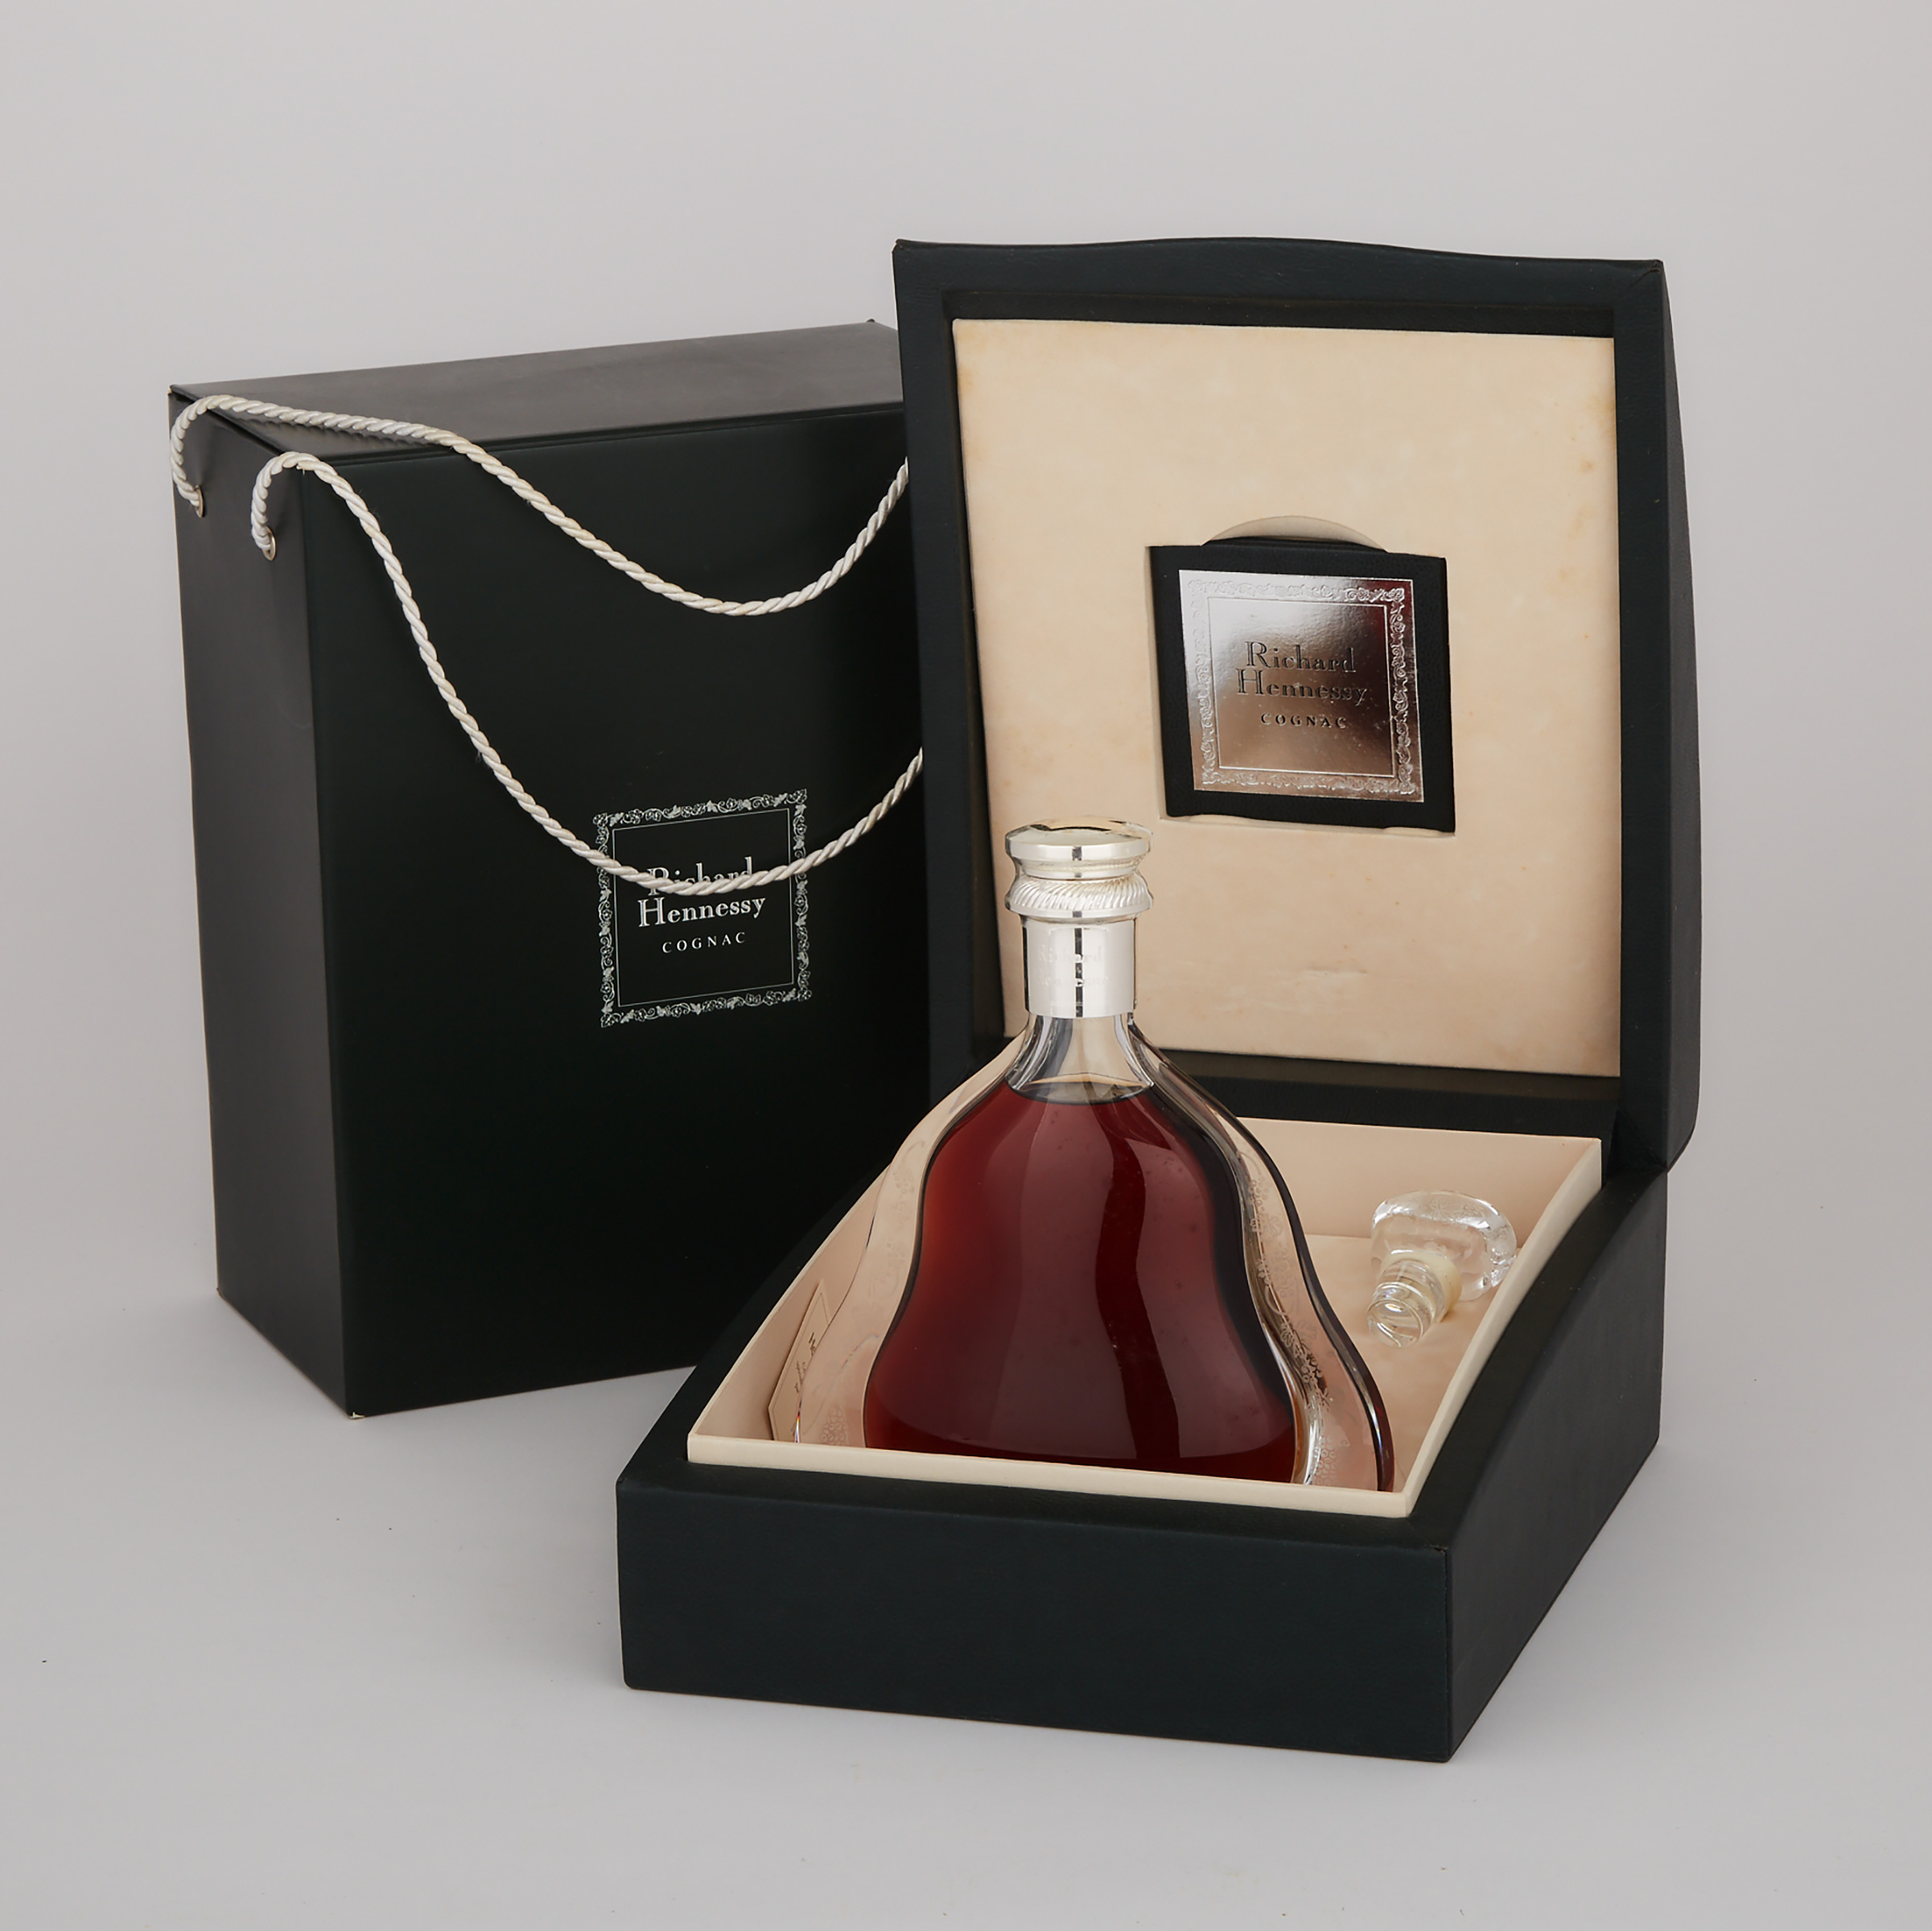 RICHARD HENNESSY COGNAC NAS (ONE 70 CL)